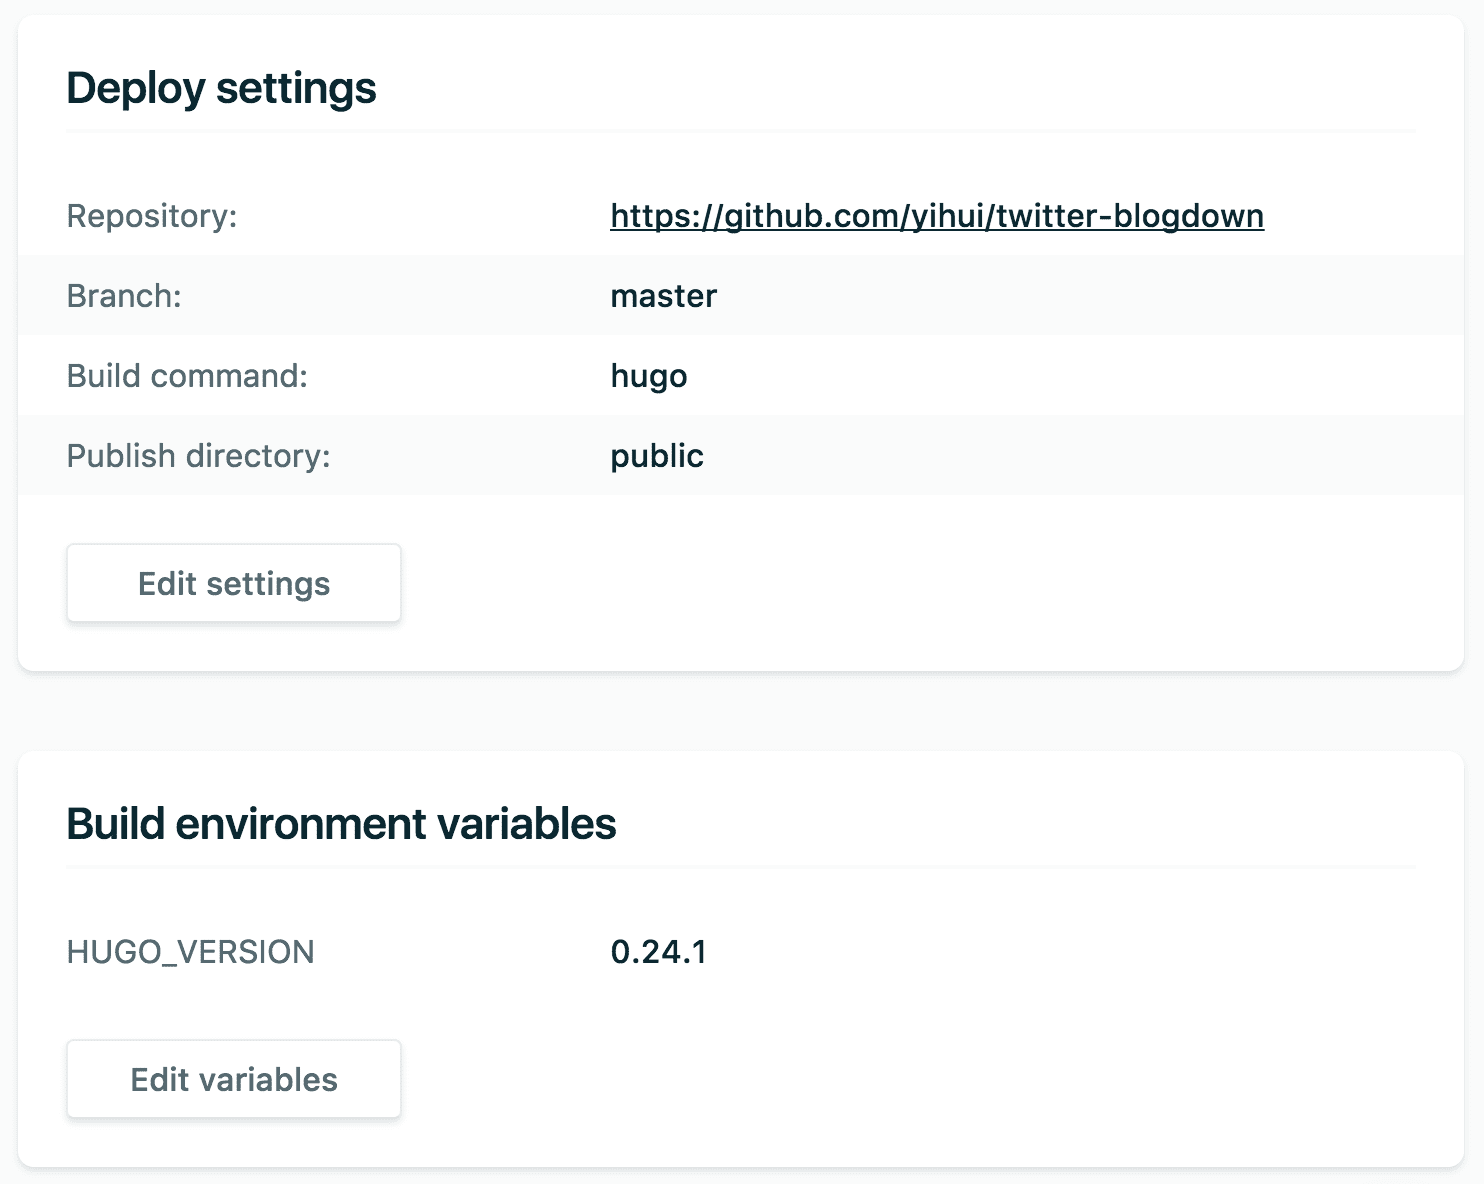 Example settings of a website deployed on Netlify.